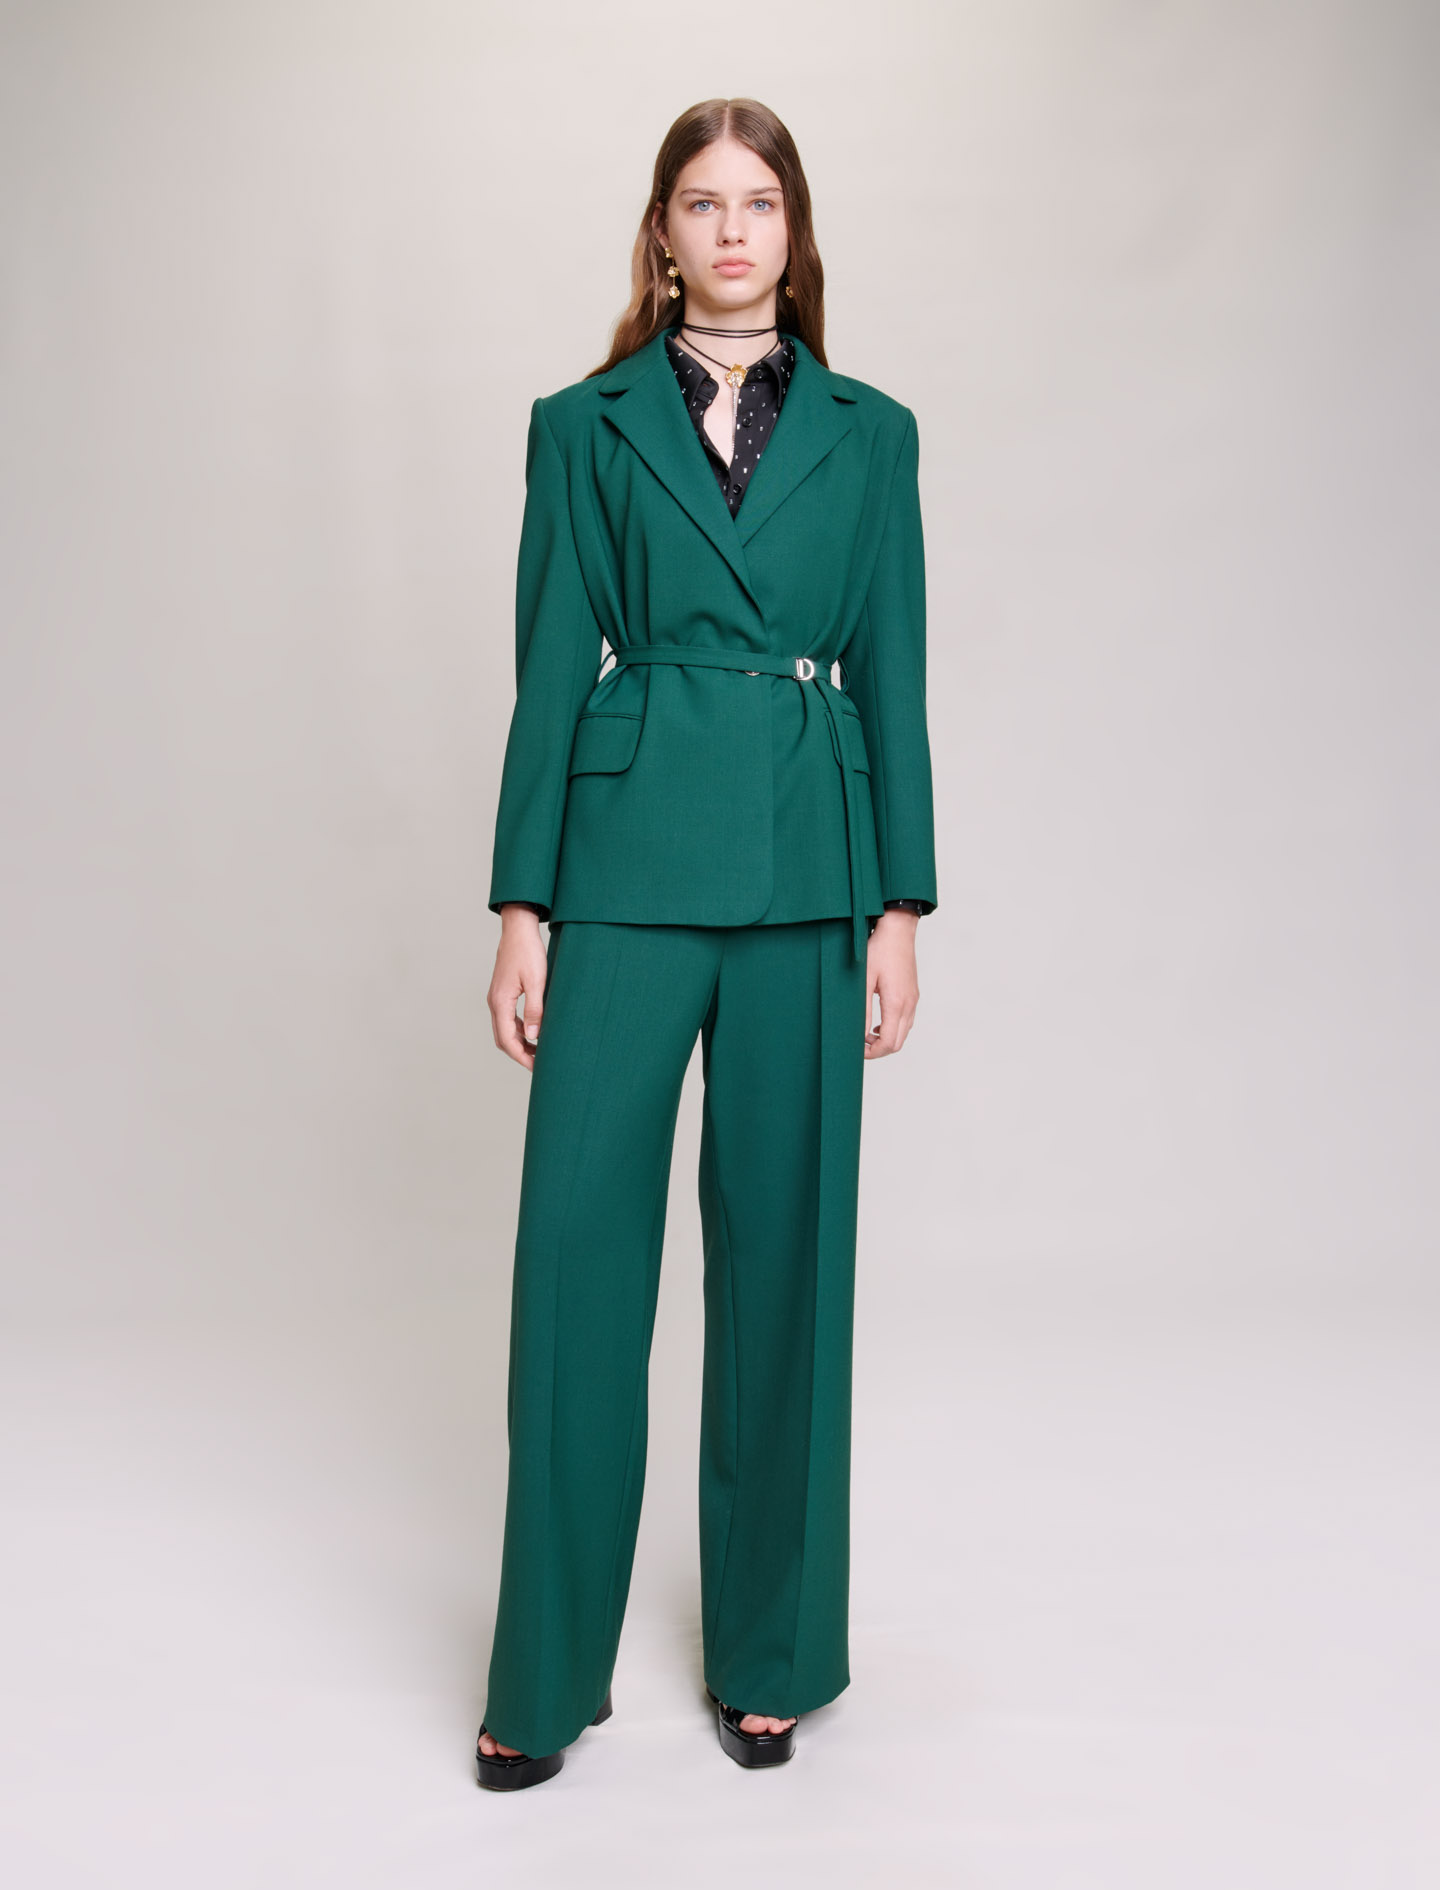 Maje Woman's polyester, Suit jacket for Fall/Winter, in color Bottle Green /